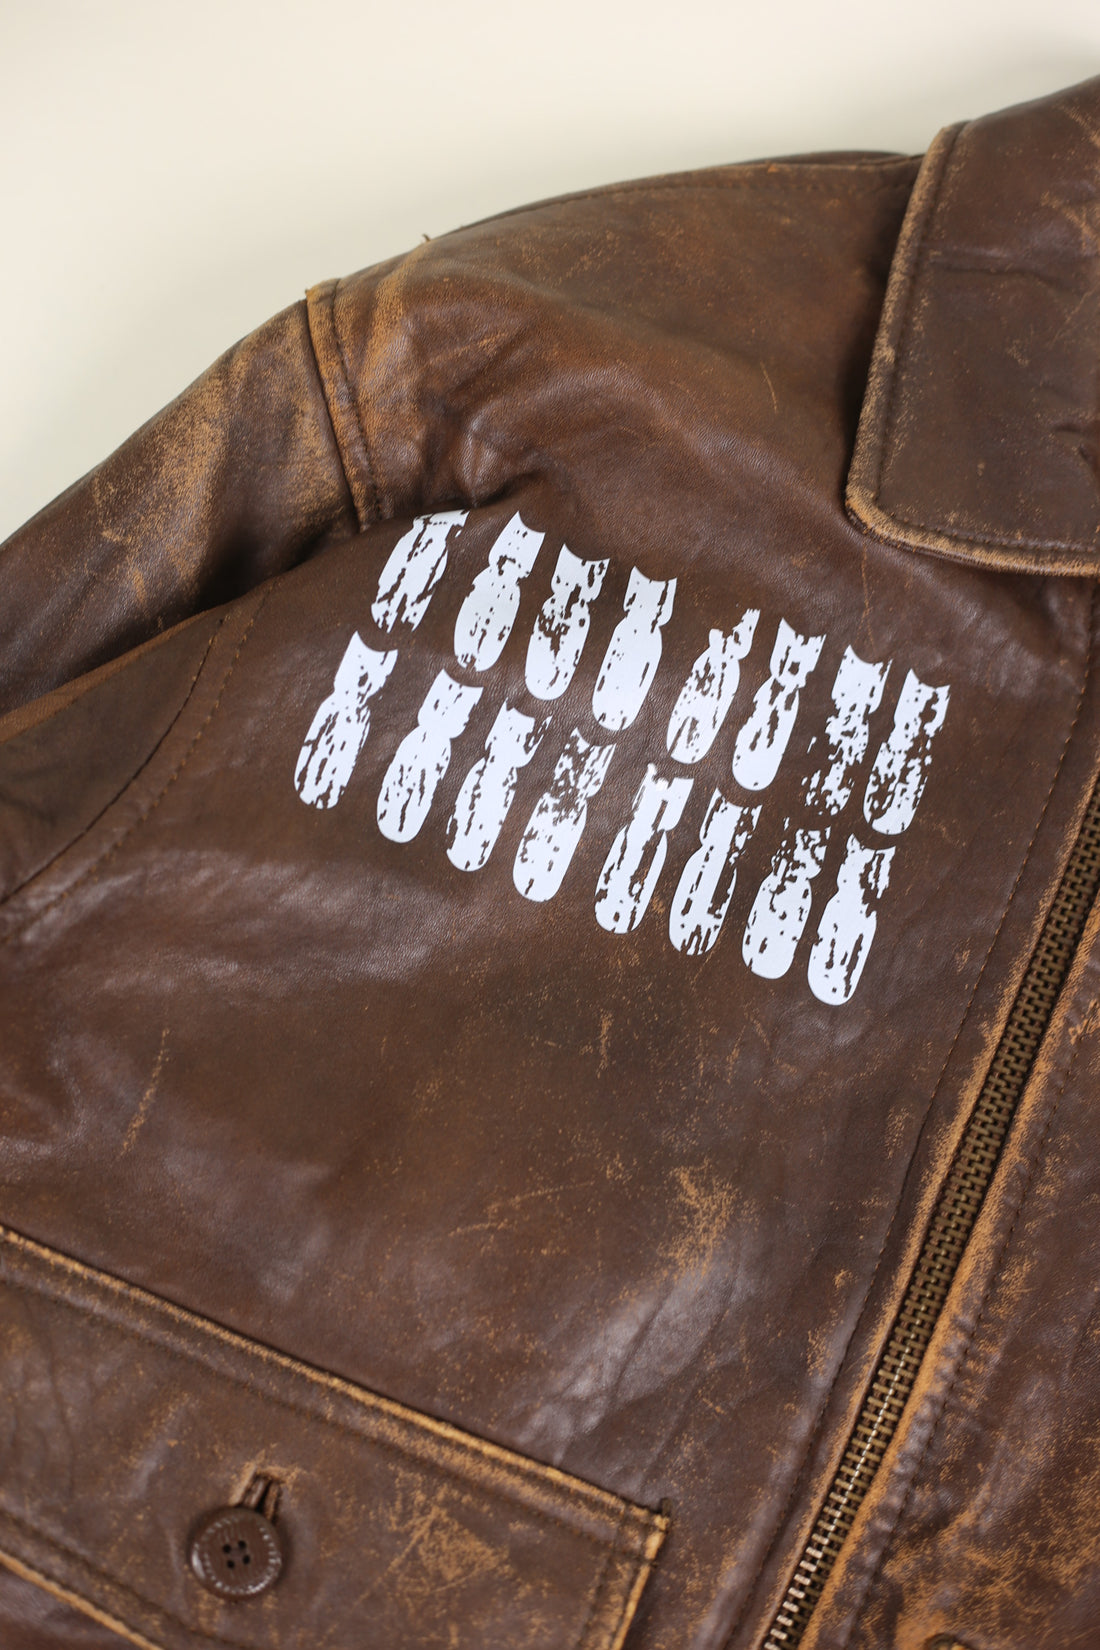 A2 Air Apache Leather Jacket - M -